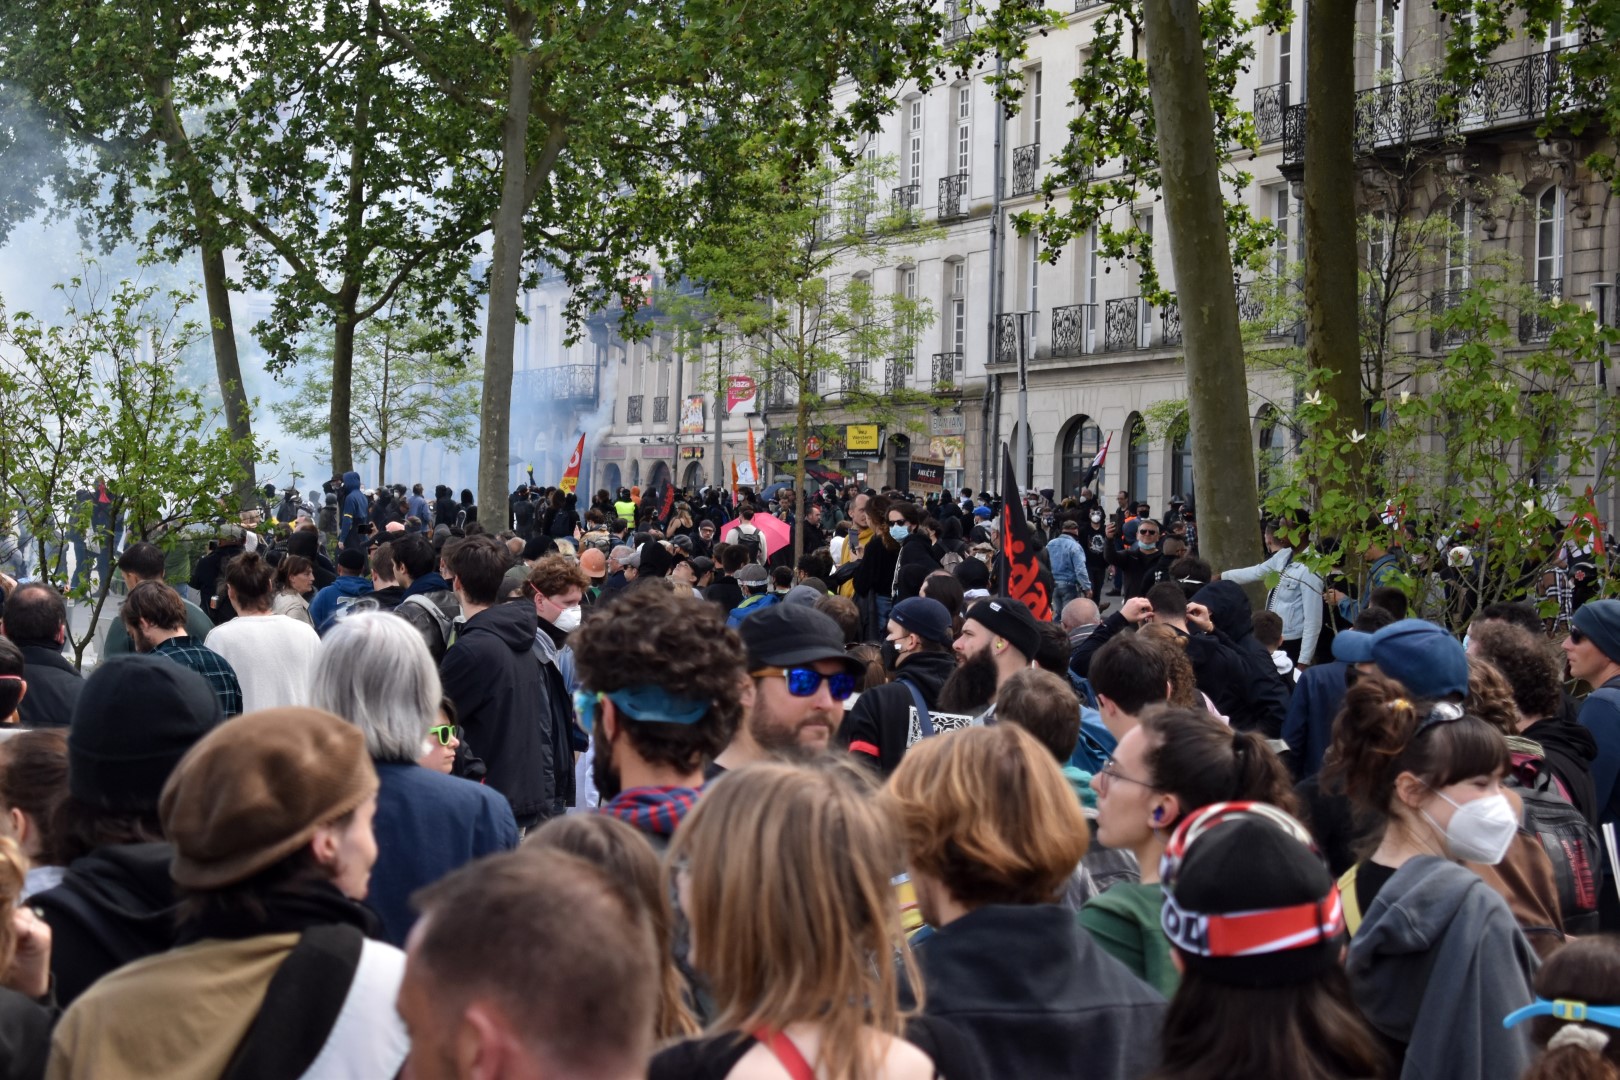 More tear gas, May 1 protest, Nantes